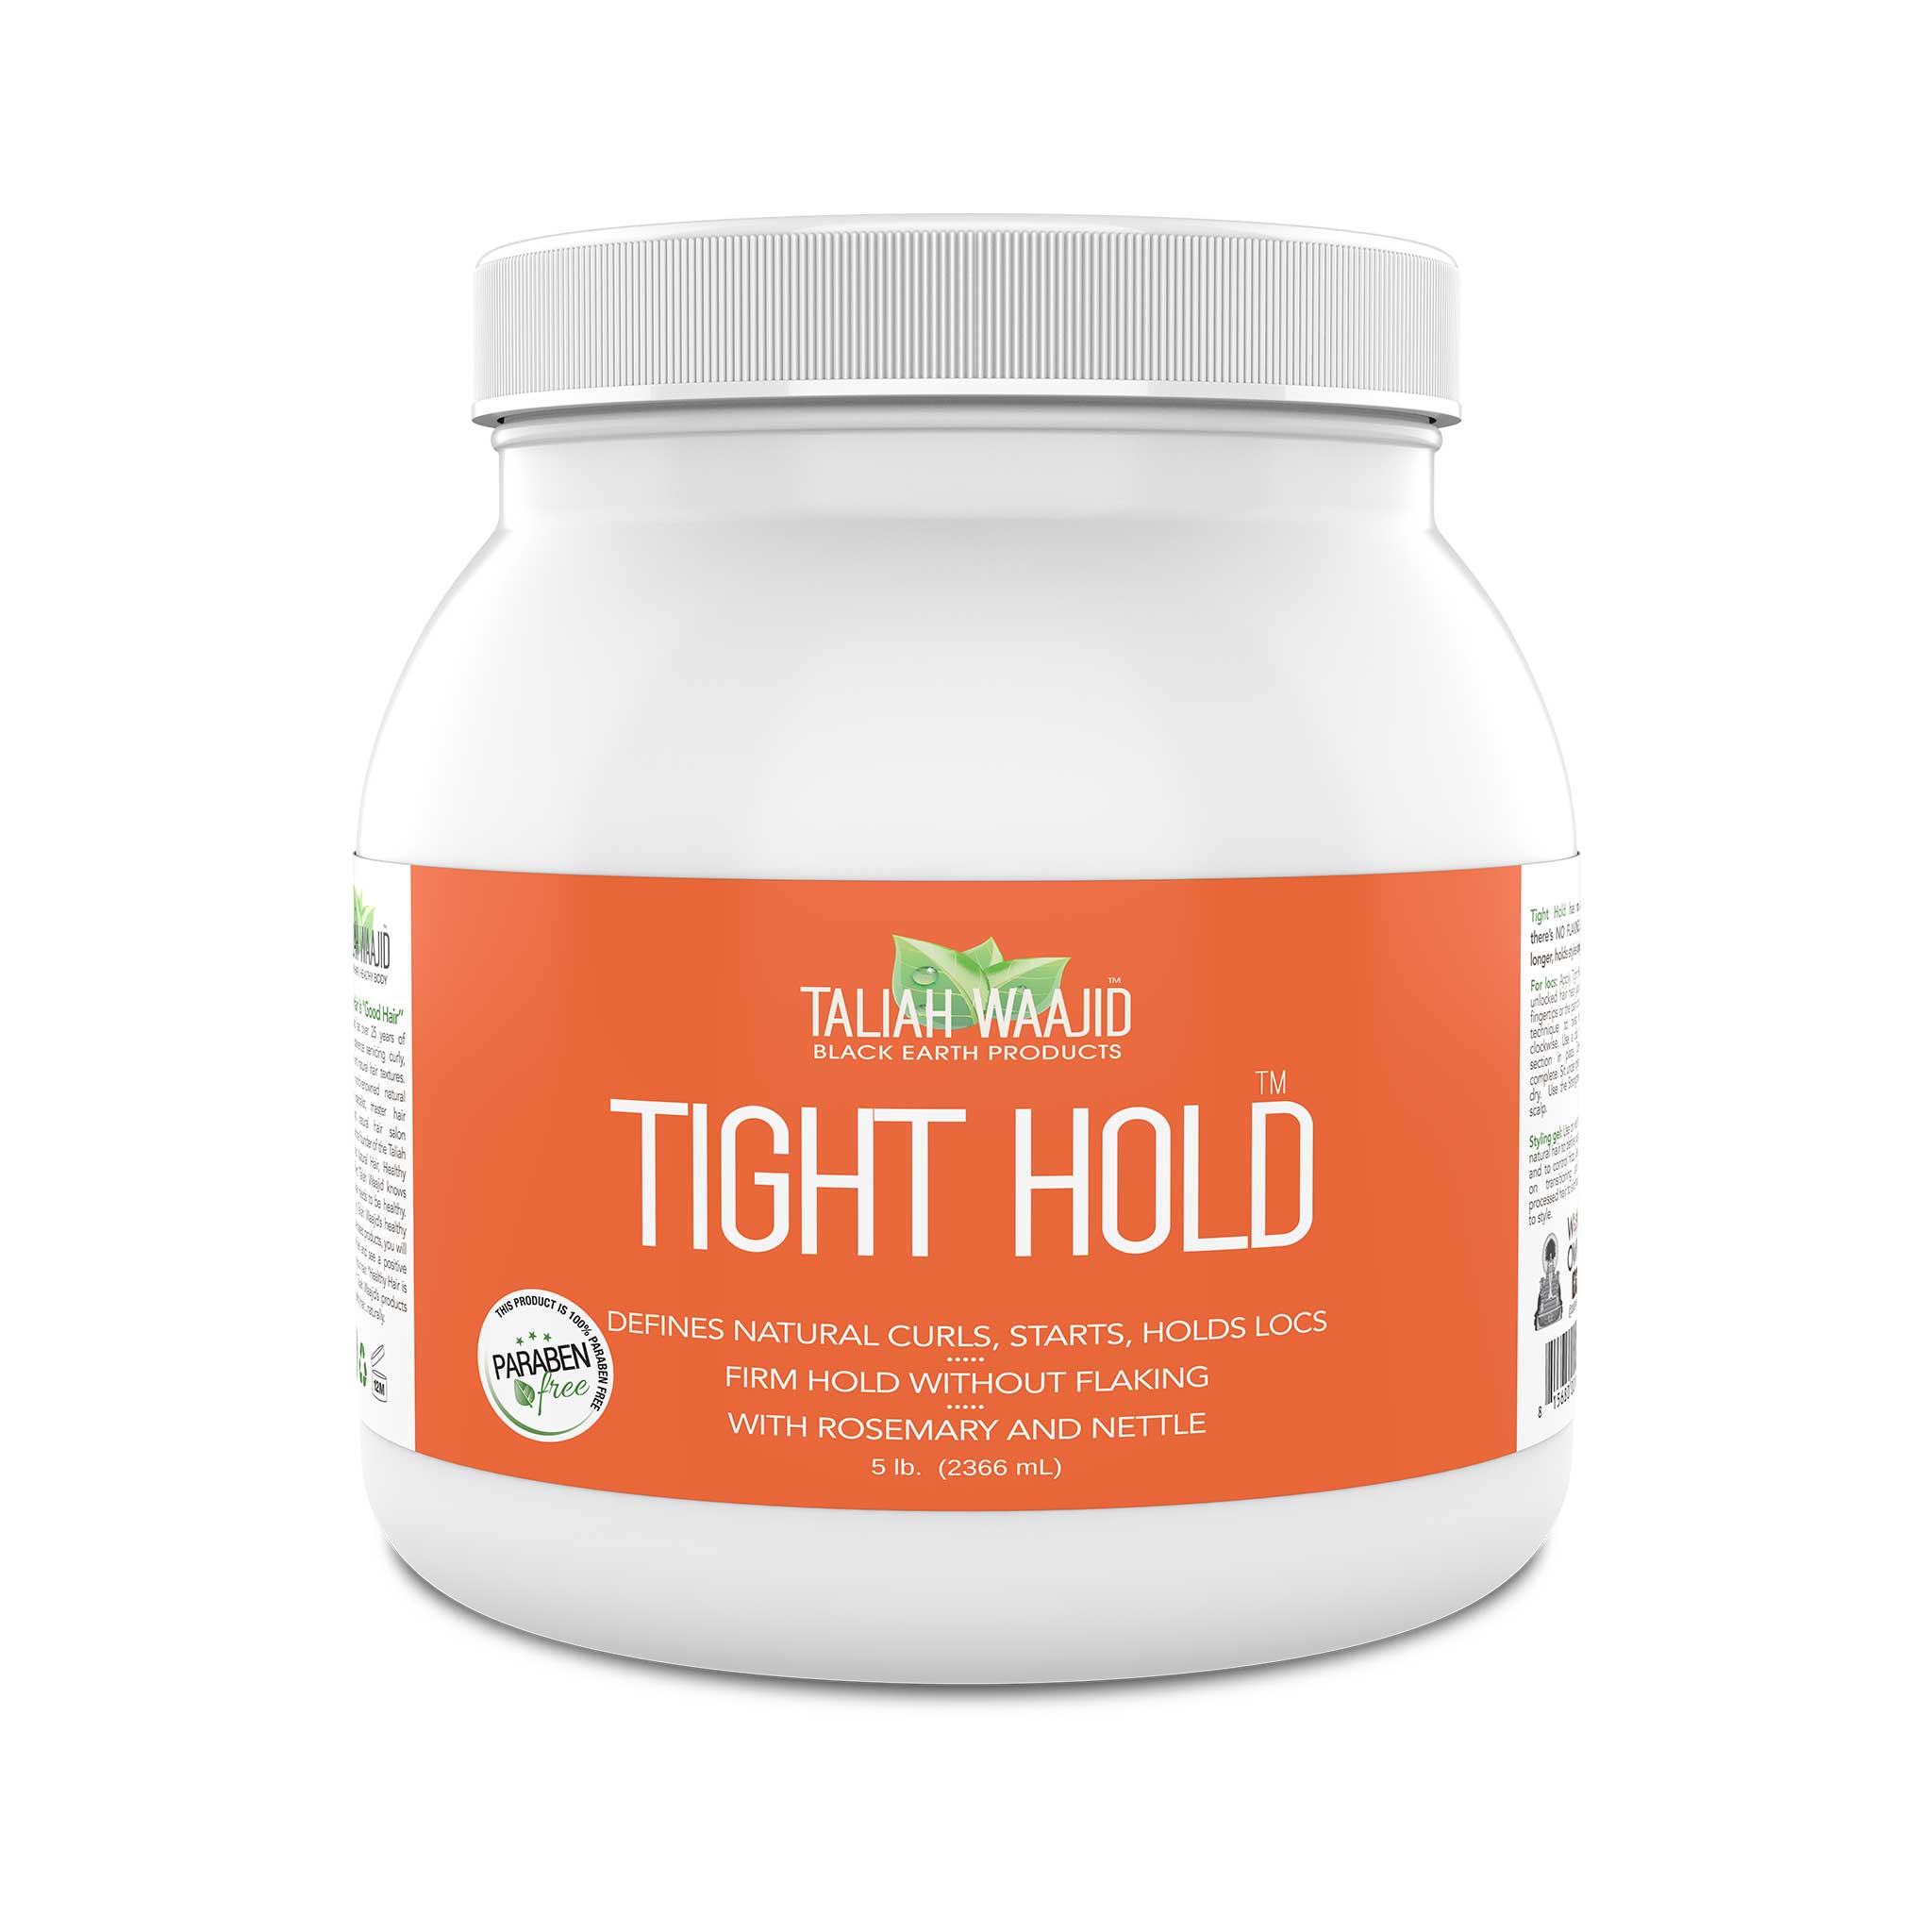 Black Earth Products Tight Hold 5lb